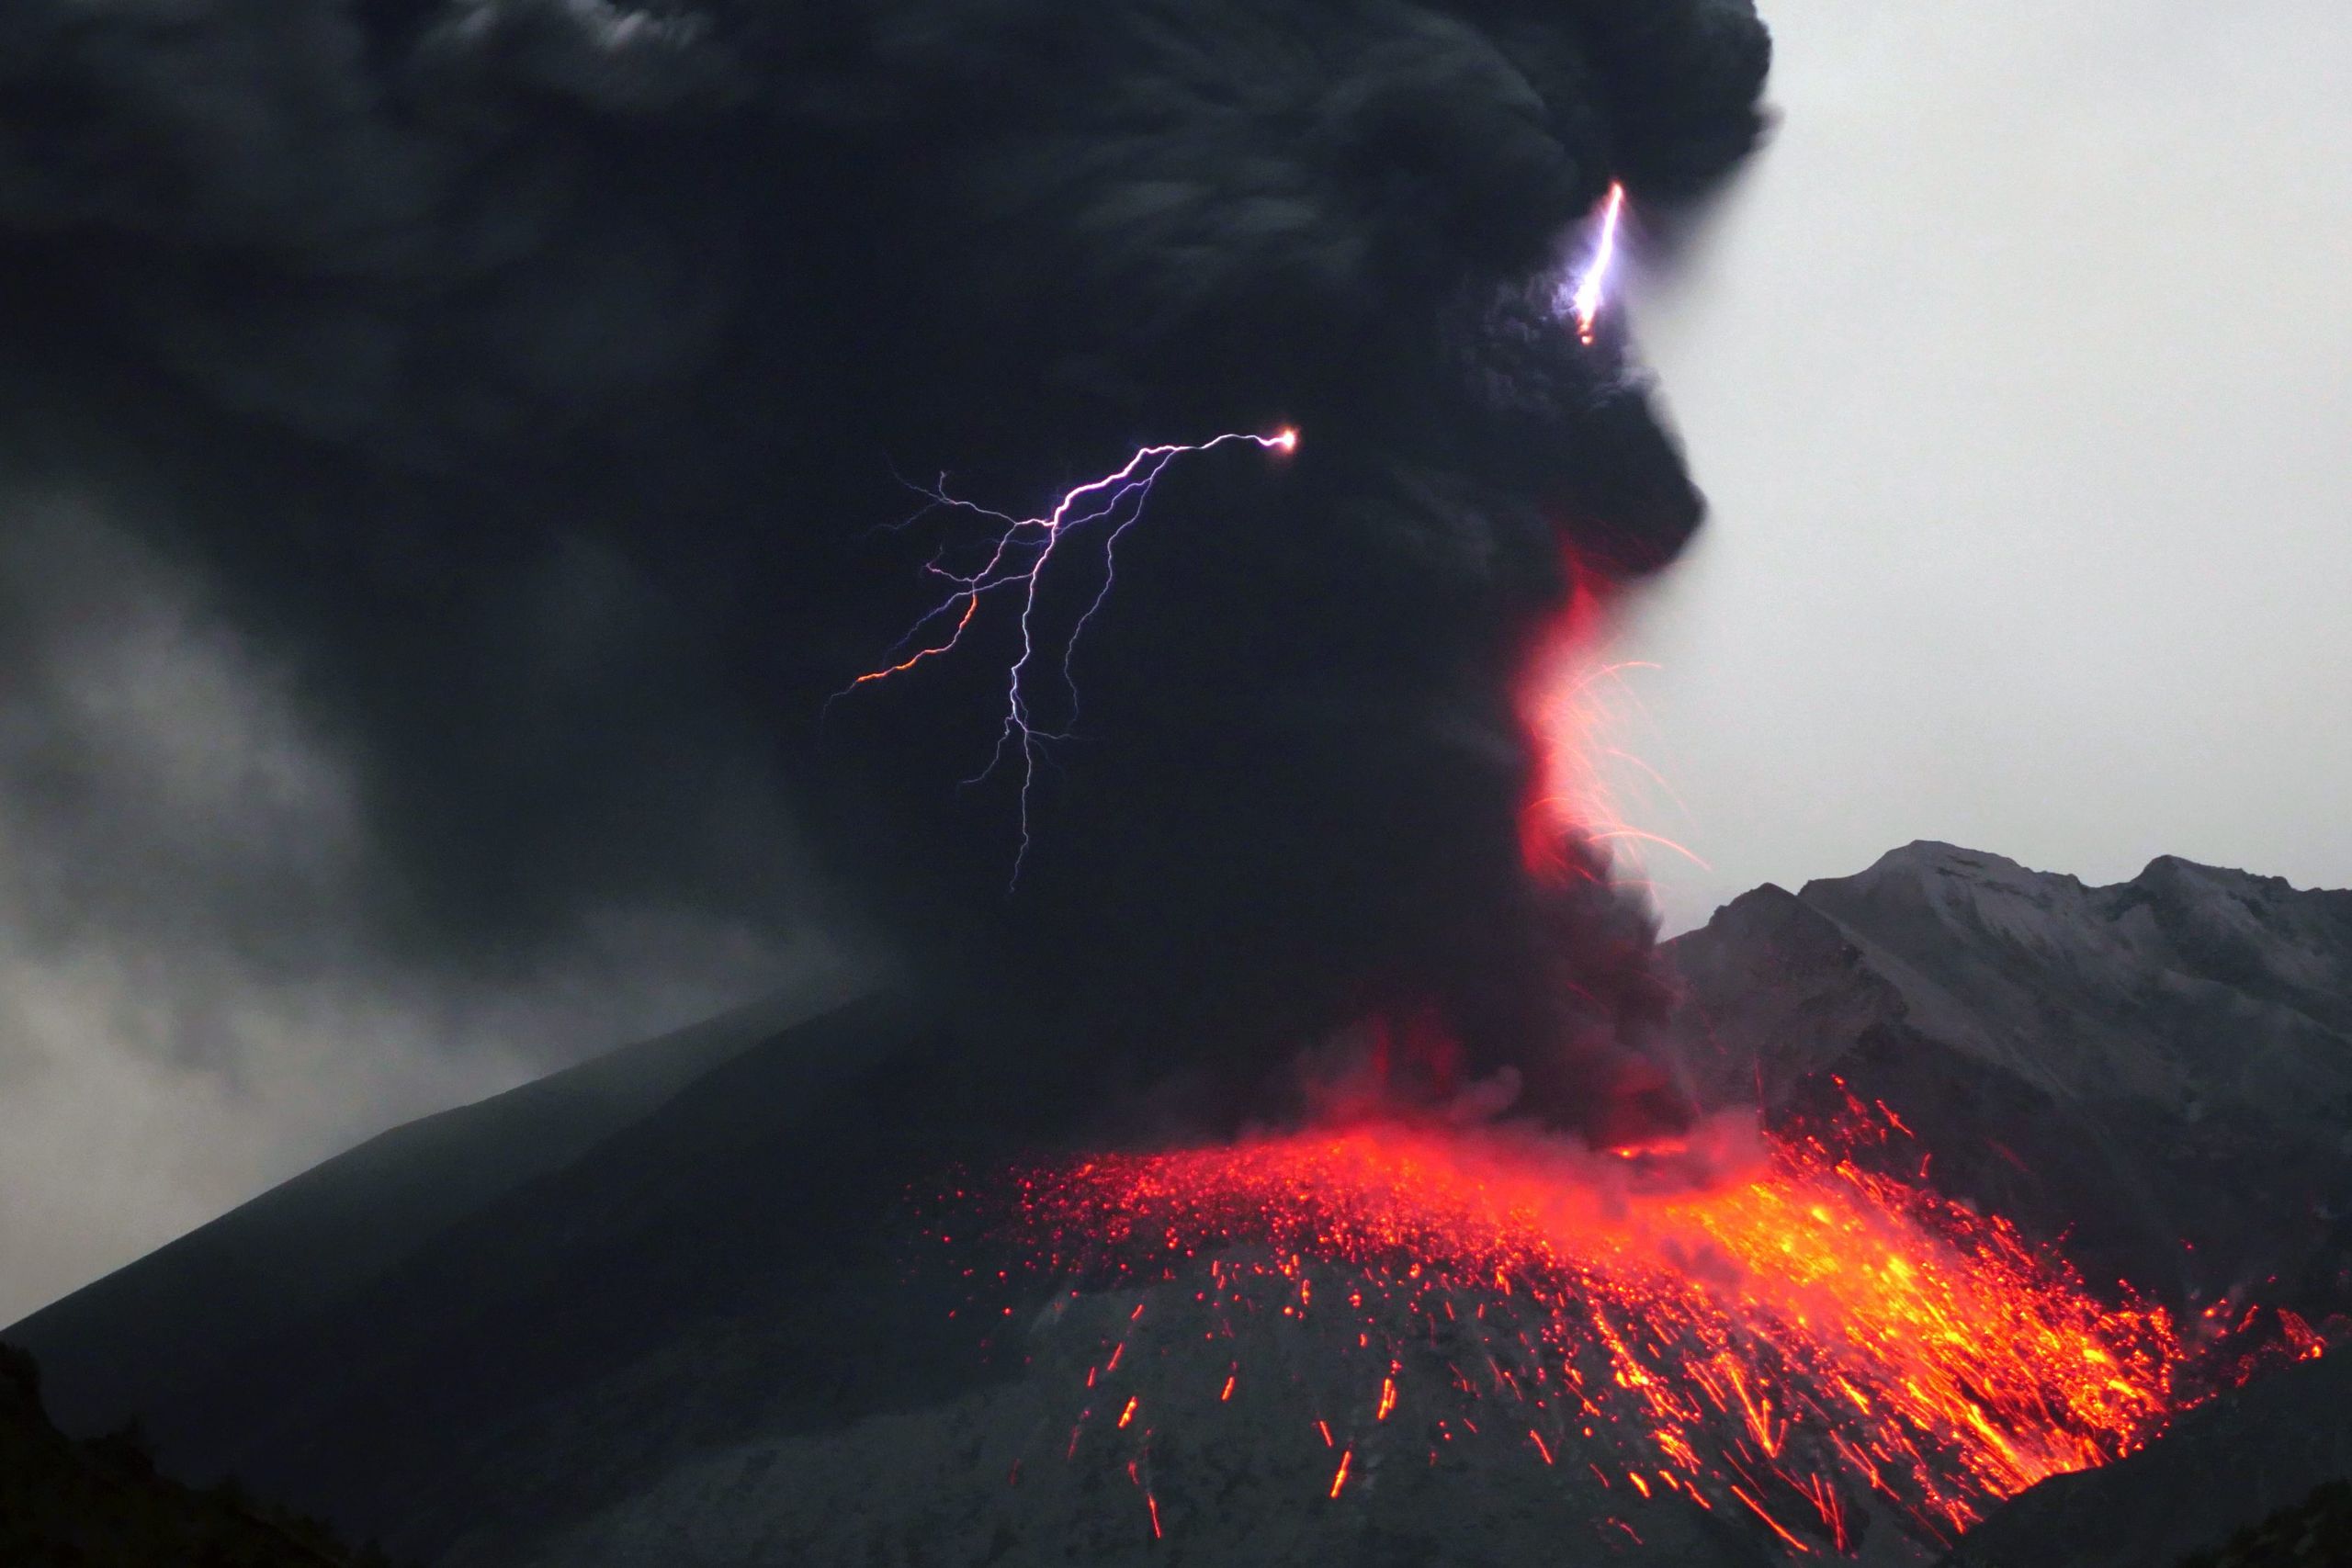 video-japan-march-lightning-the-ash-lava-out-from-sakurajima-opening-march-japan-life-burning-hot-air-marc-active-the-german-able-rare.jpg